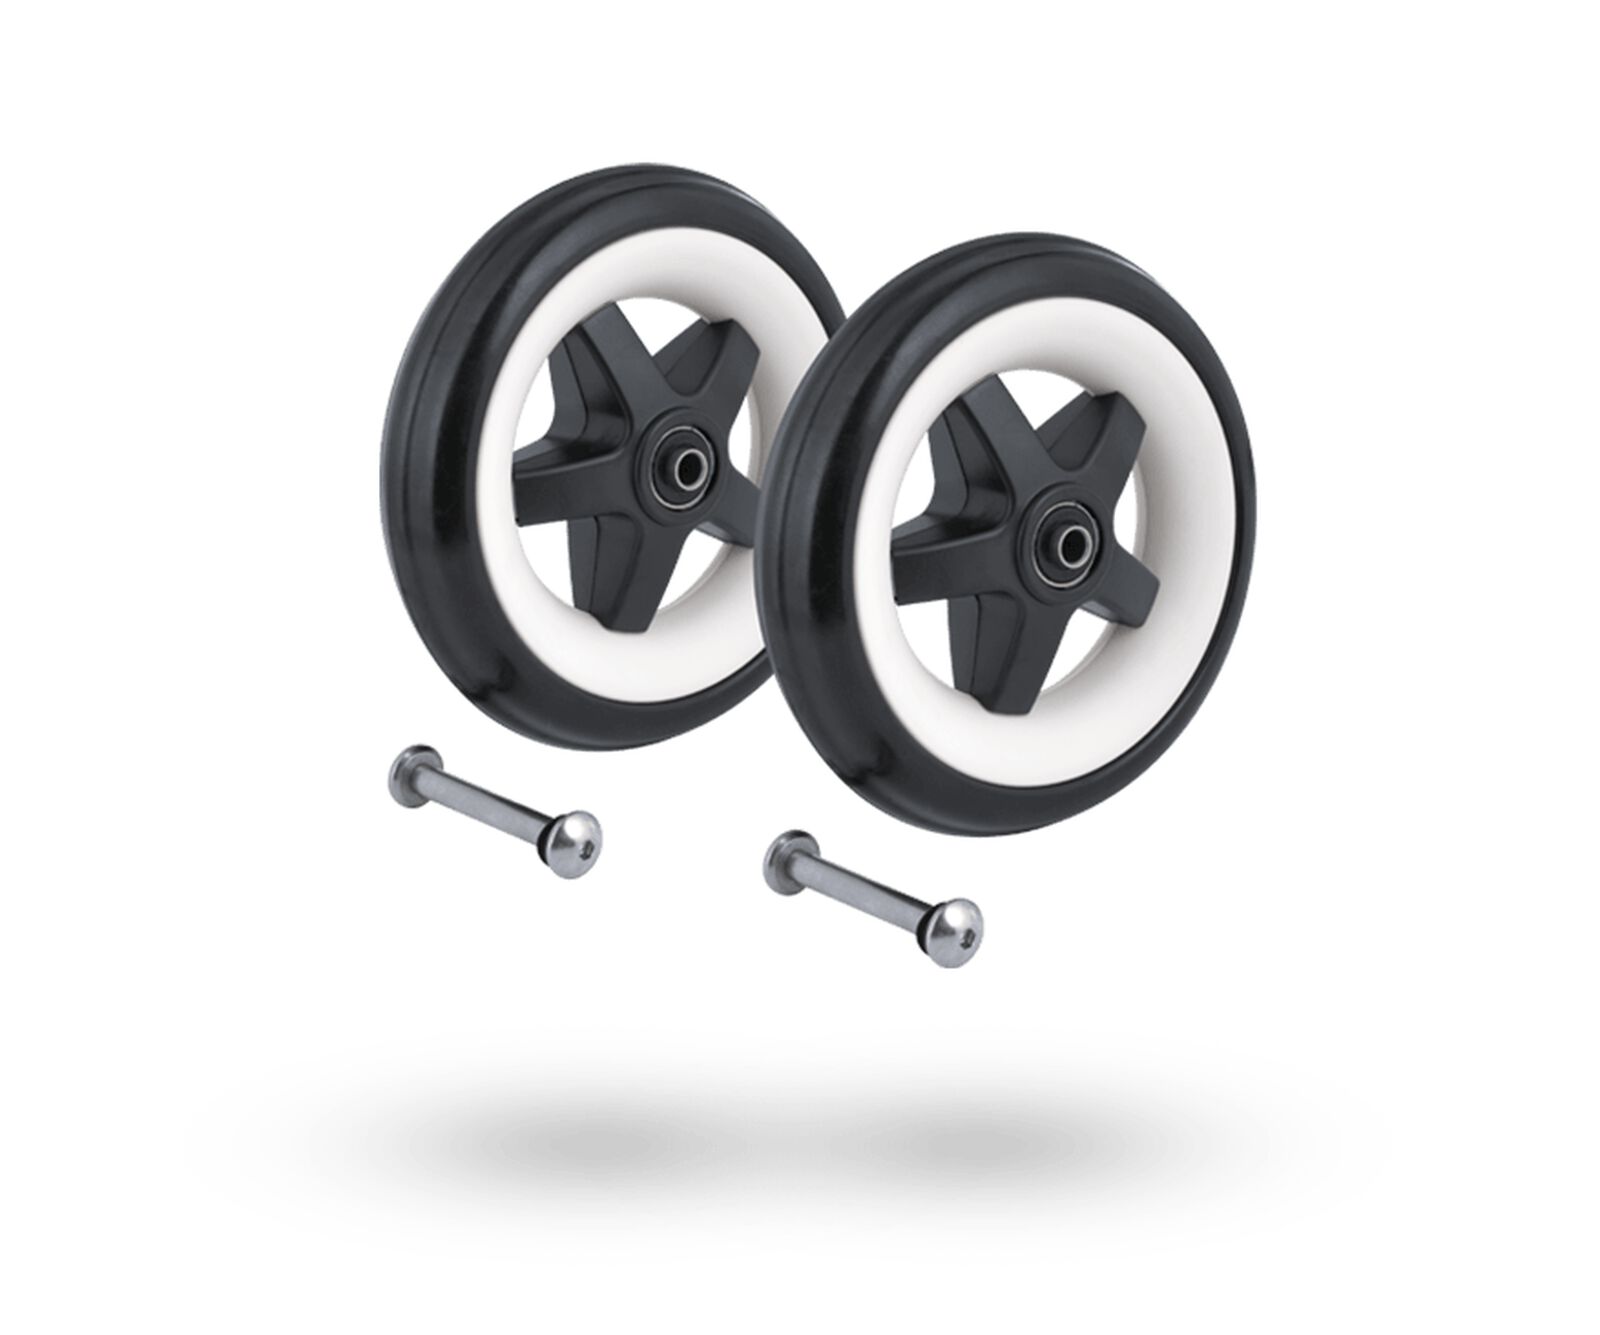 Bugaboo Bee+ 6inch front wheels replacement set (foam)